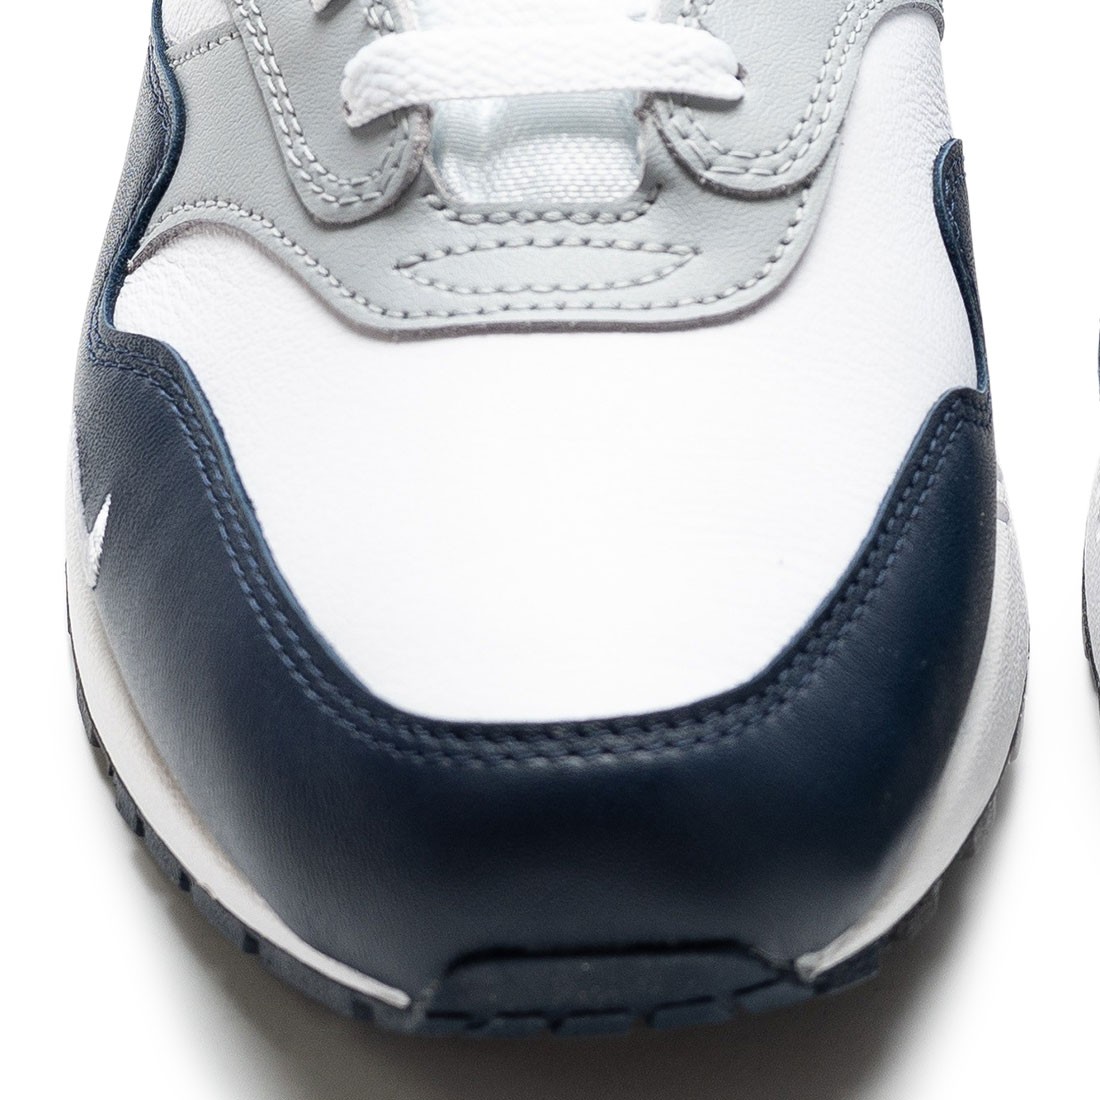 MODEL：AIR MAX 1 LV8 COLOR：WHITE/OBSIDIAN-WOLF GREY-BLACK YEAR